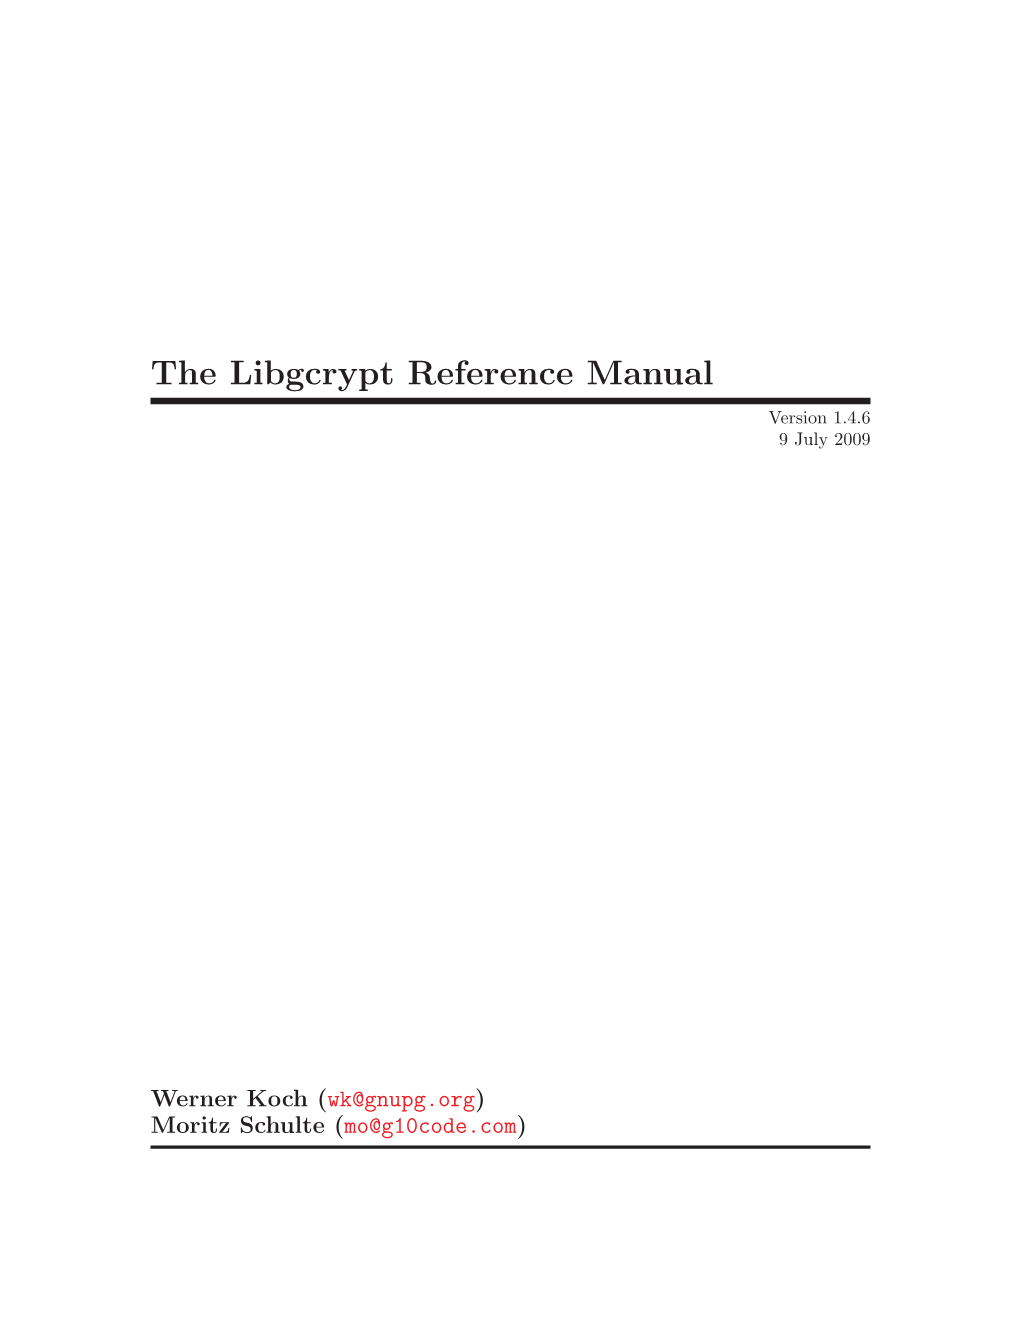 The Libgcrypt Reference Manual Version 1.4.6 9 July 2009